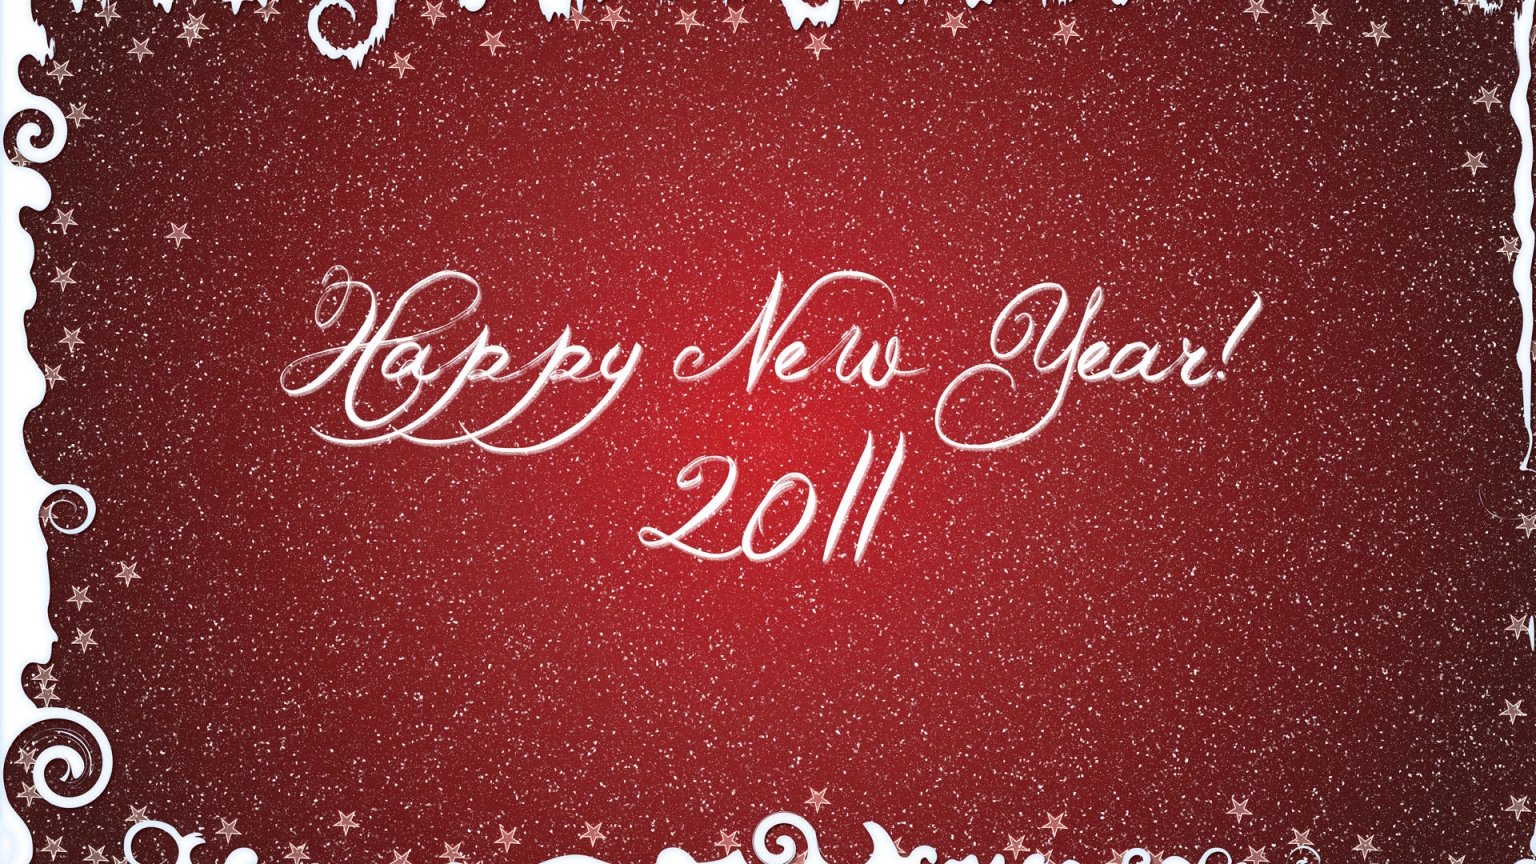 Happy New Year 2011 for 1536 x 864 HDTV resolution